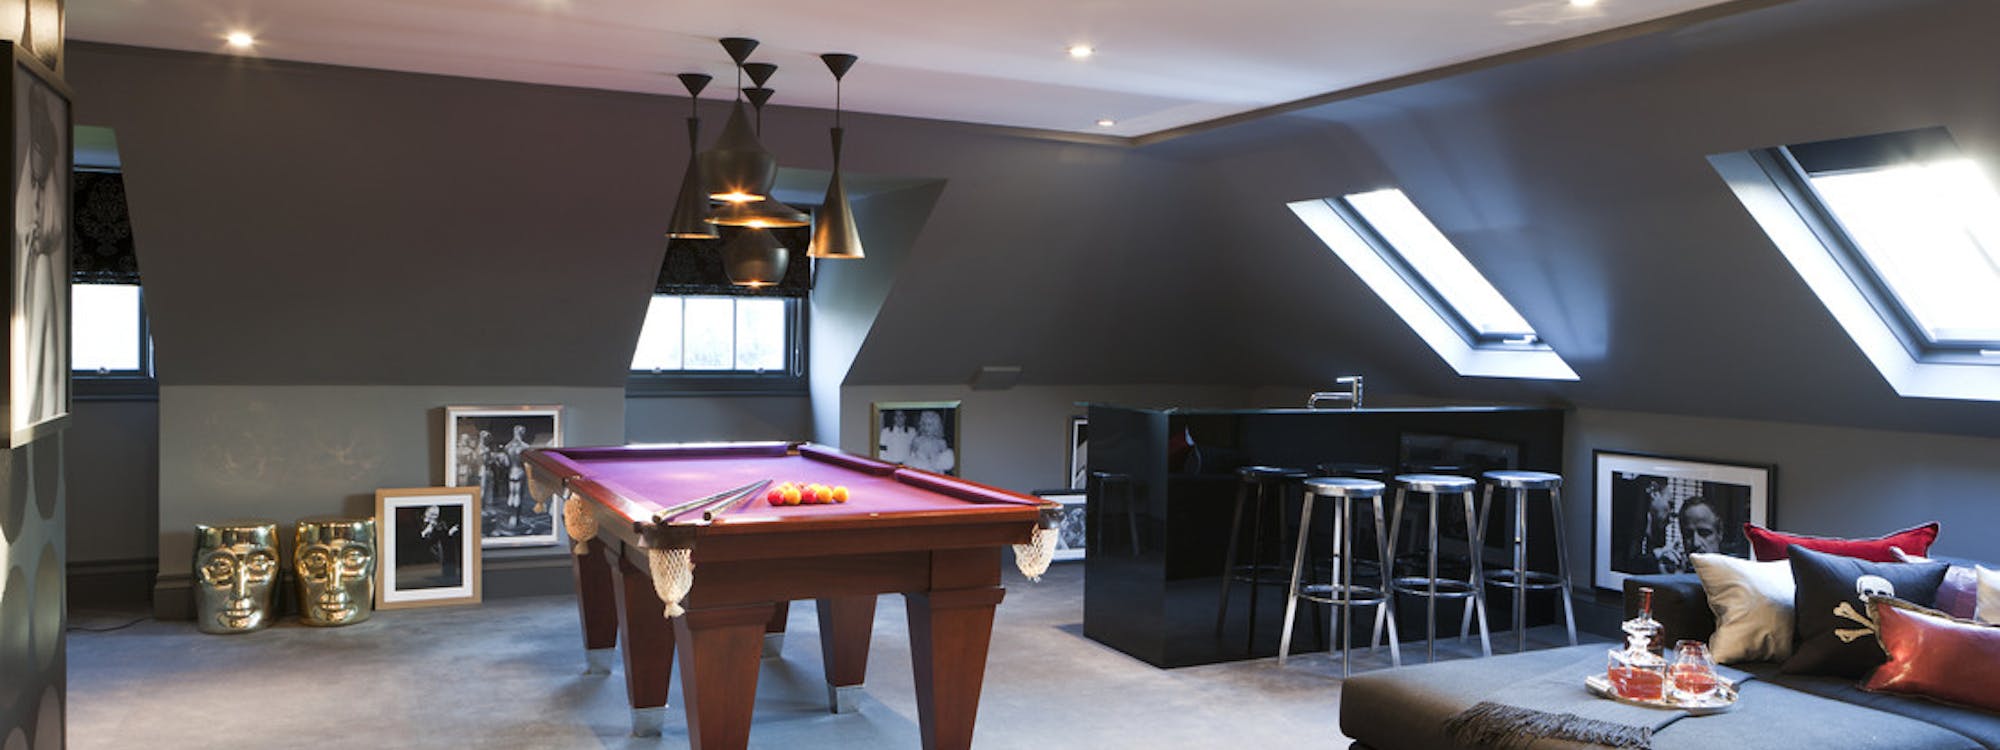 conversions - loft, garage and basement to create additional space in your home